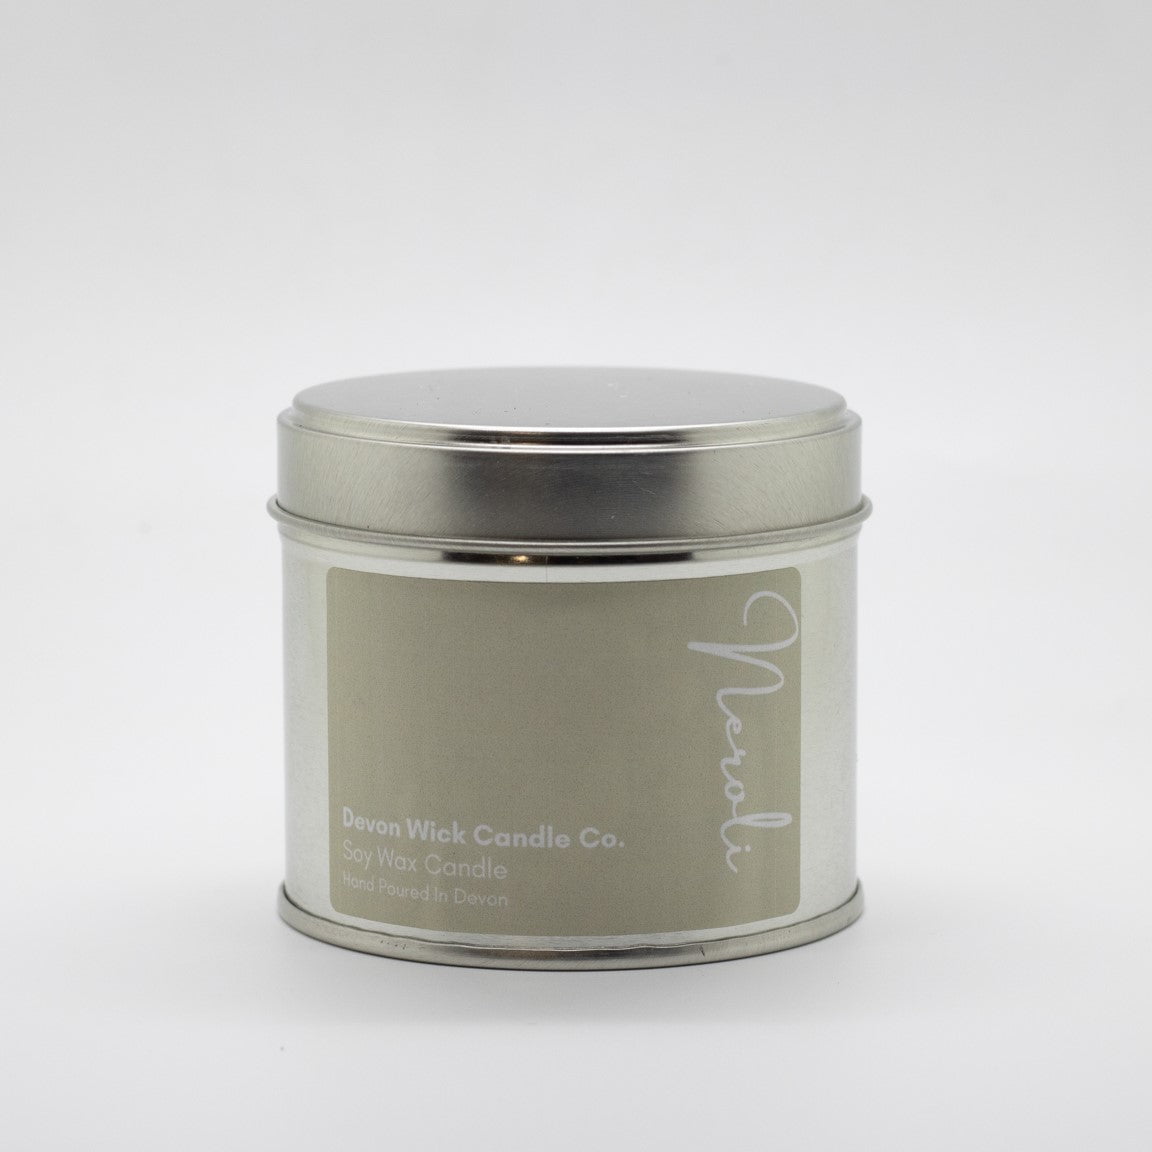 Devon Wick Candle Co. Limited Neroli Soy Wax Tinned Candle